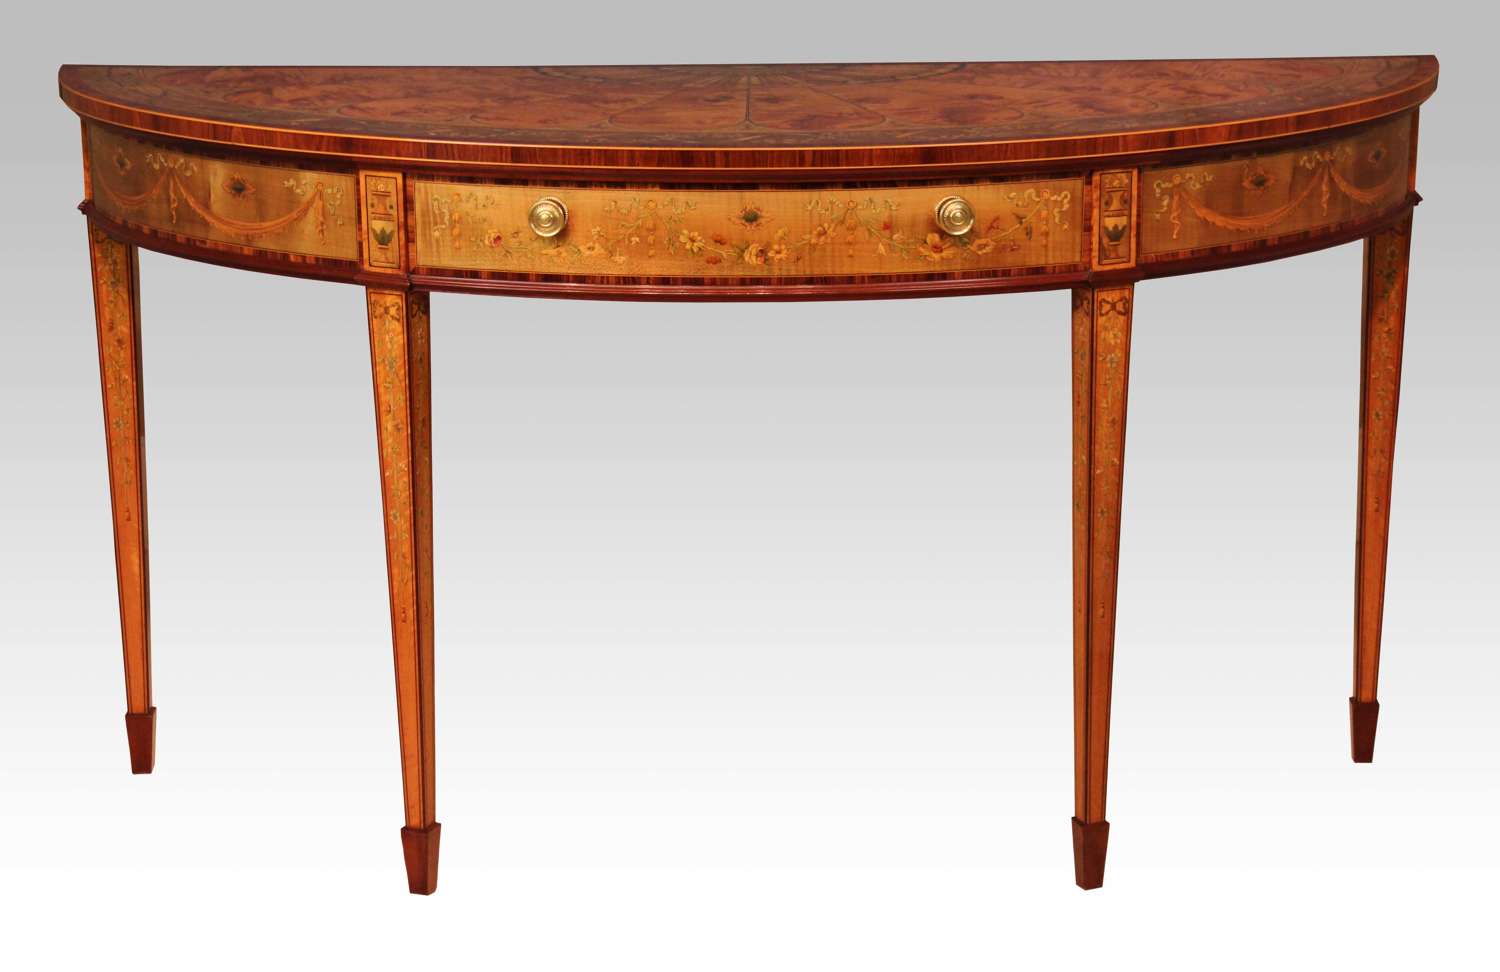 An Exhibition Quality Satinwood Console Table